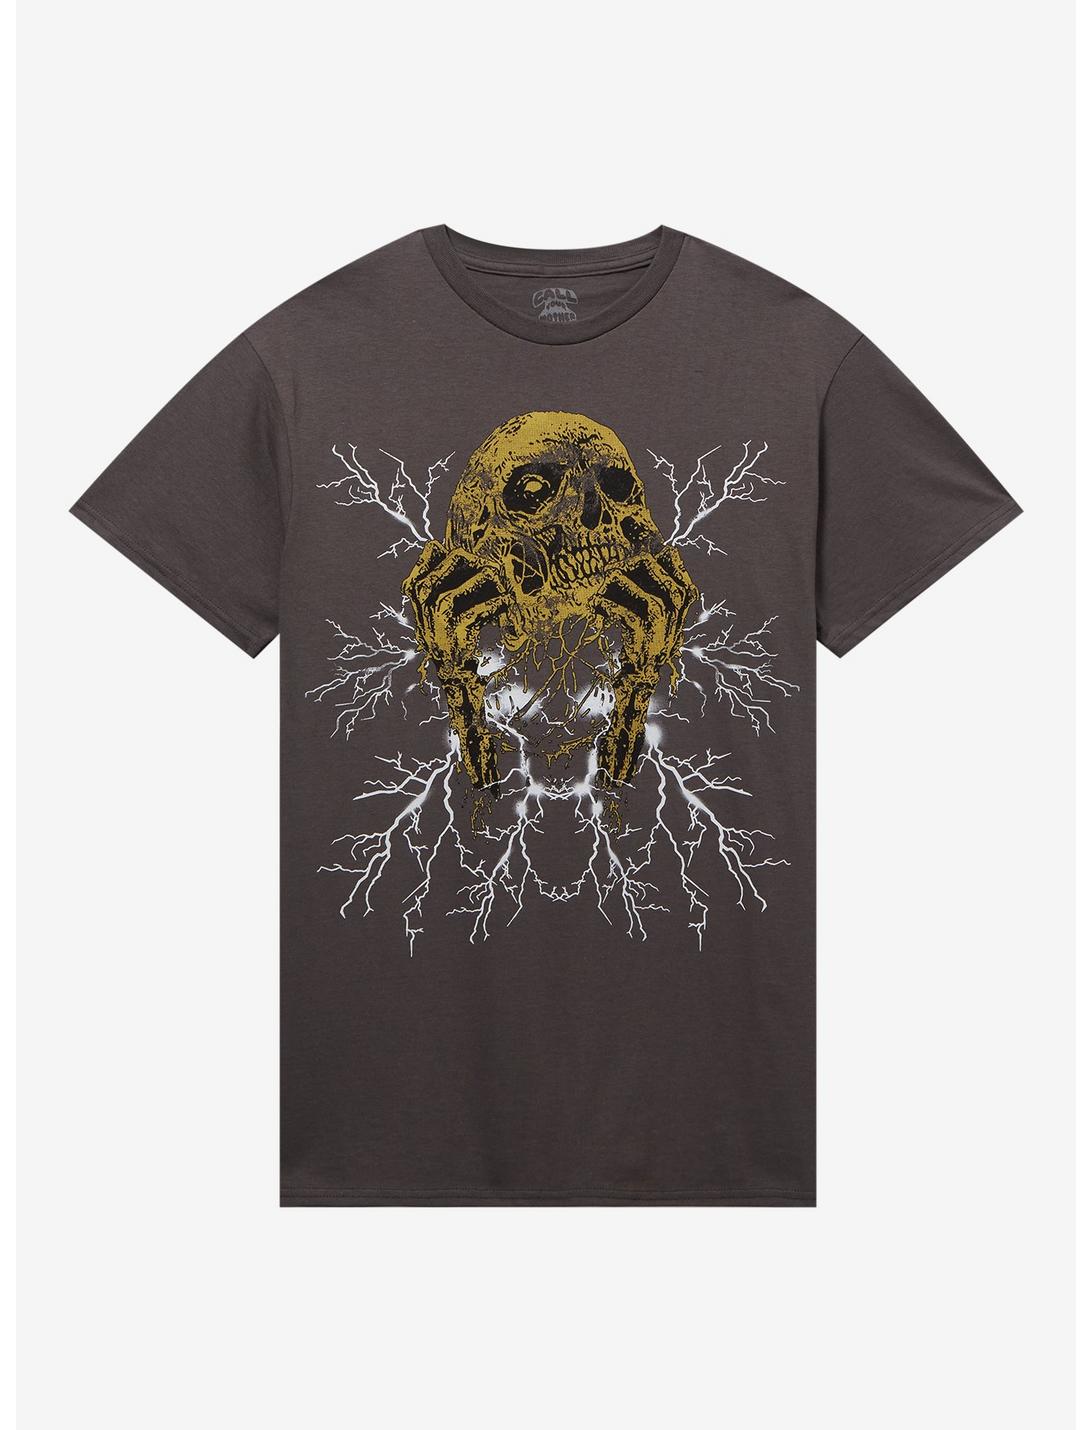 Skull Lightning T-Shirt By Call Your Mother, CHARCOAL  BLACK, hi-res